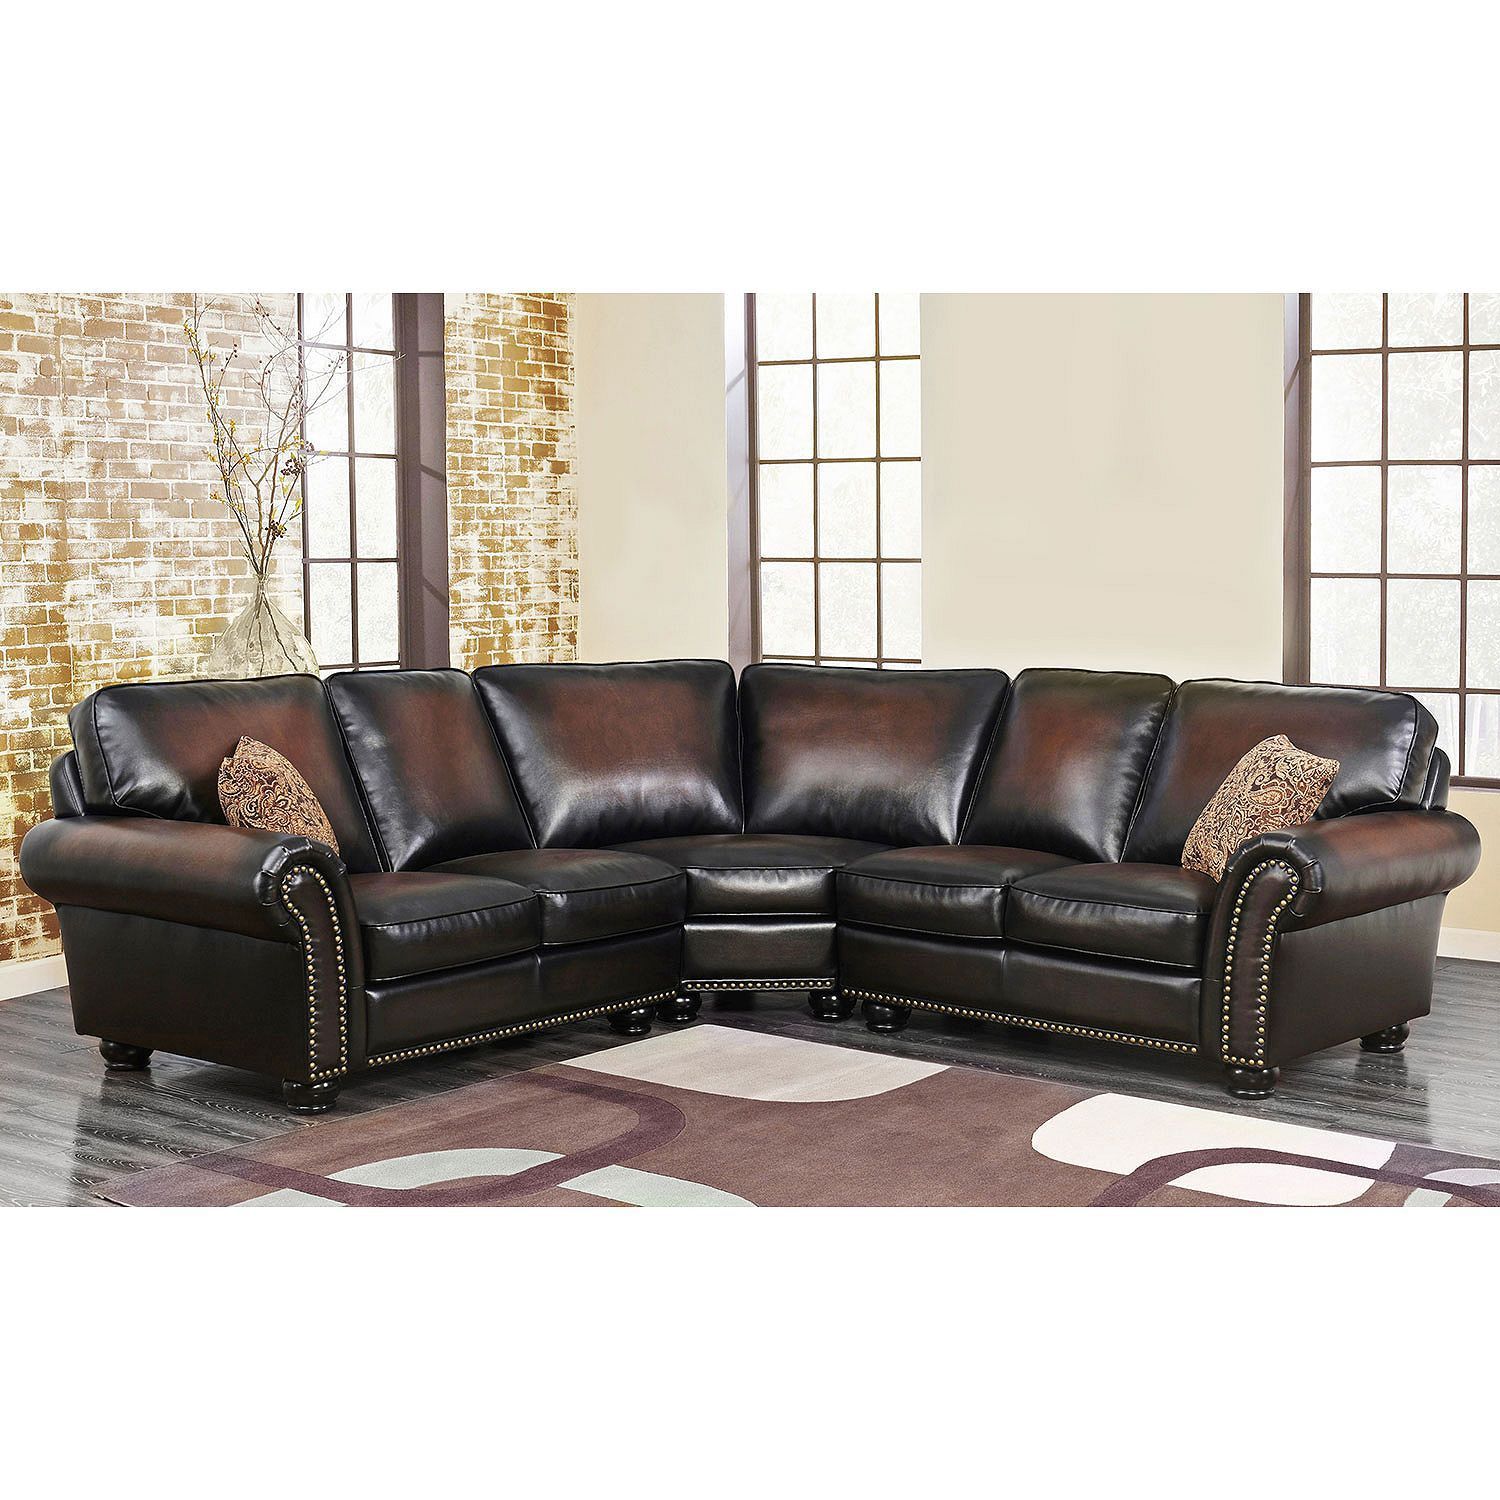 Melrose Leather 3 Piece Sectional – Sam's Club With 3 Piece Leather Sectional Sofa Sets (View 9 of 20)